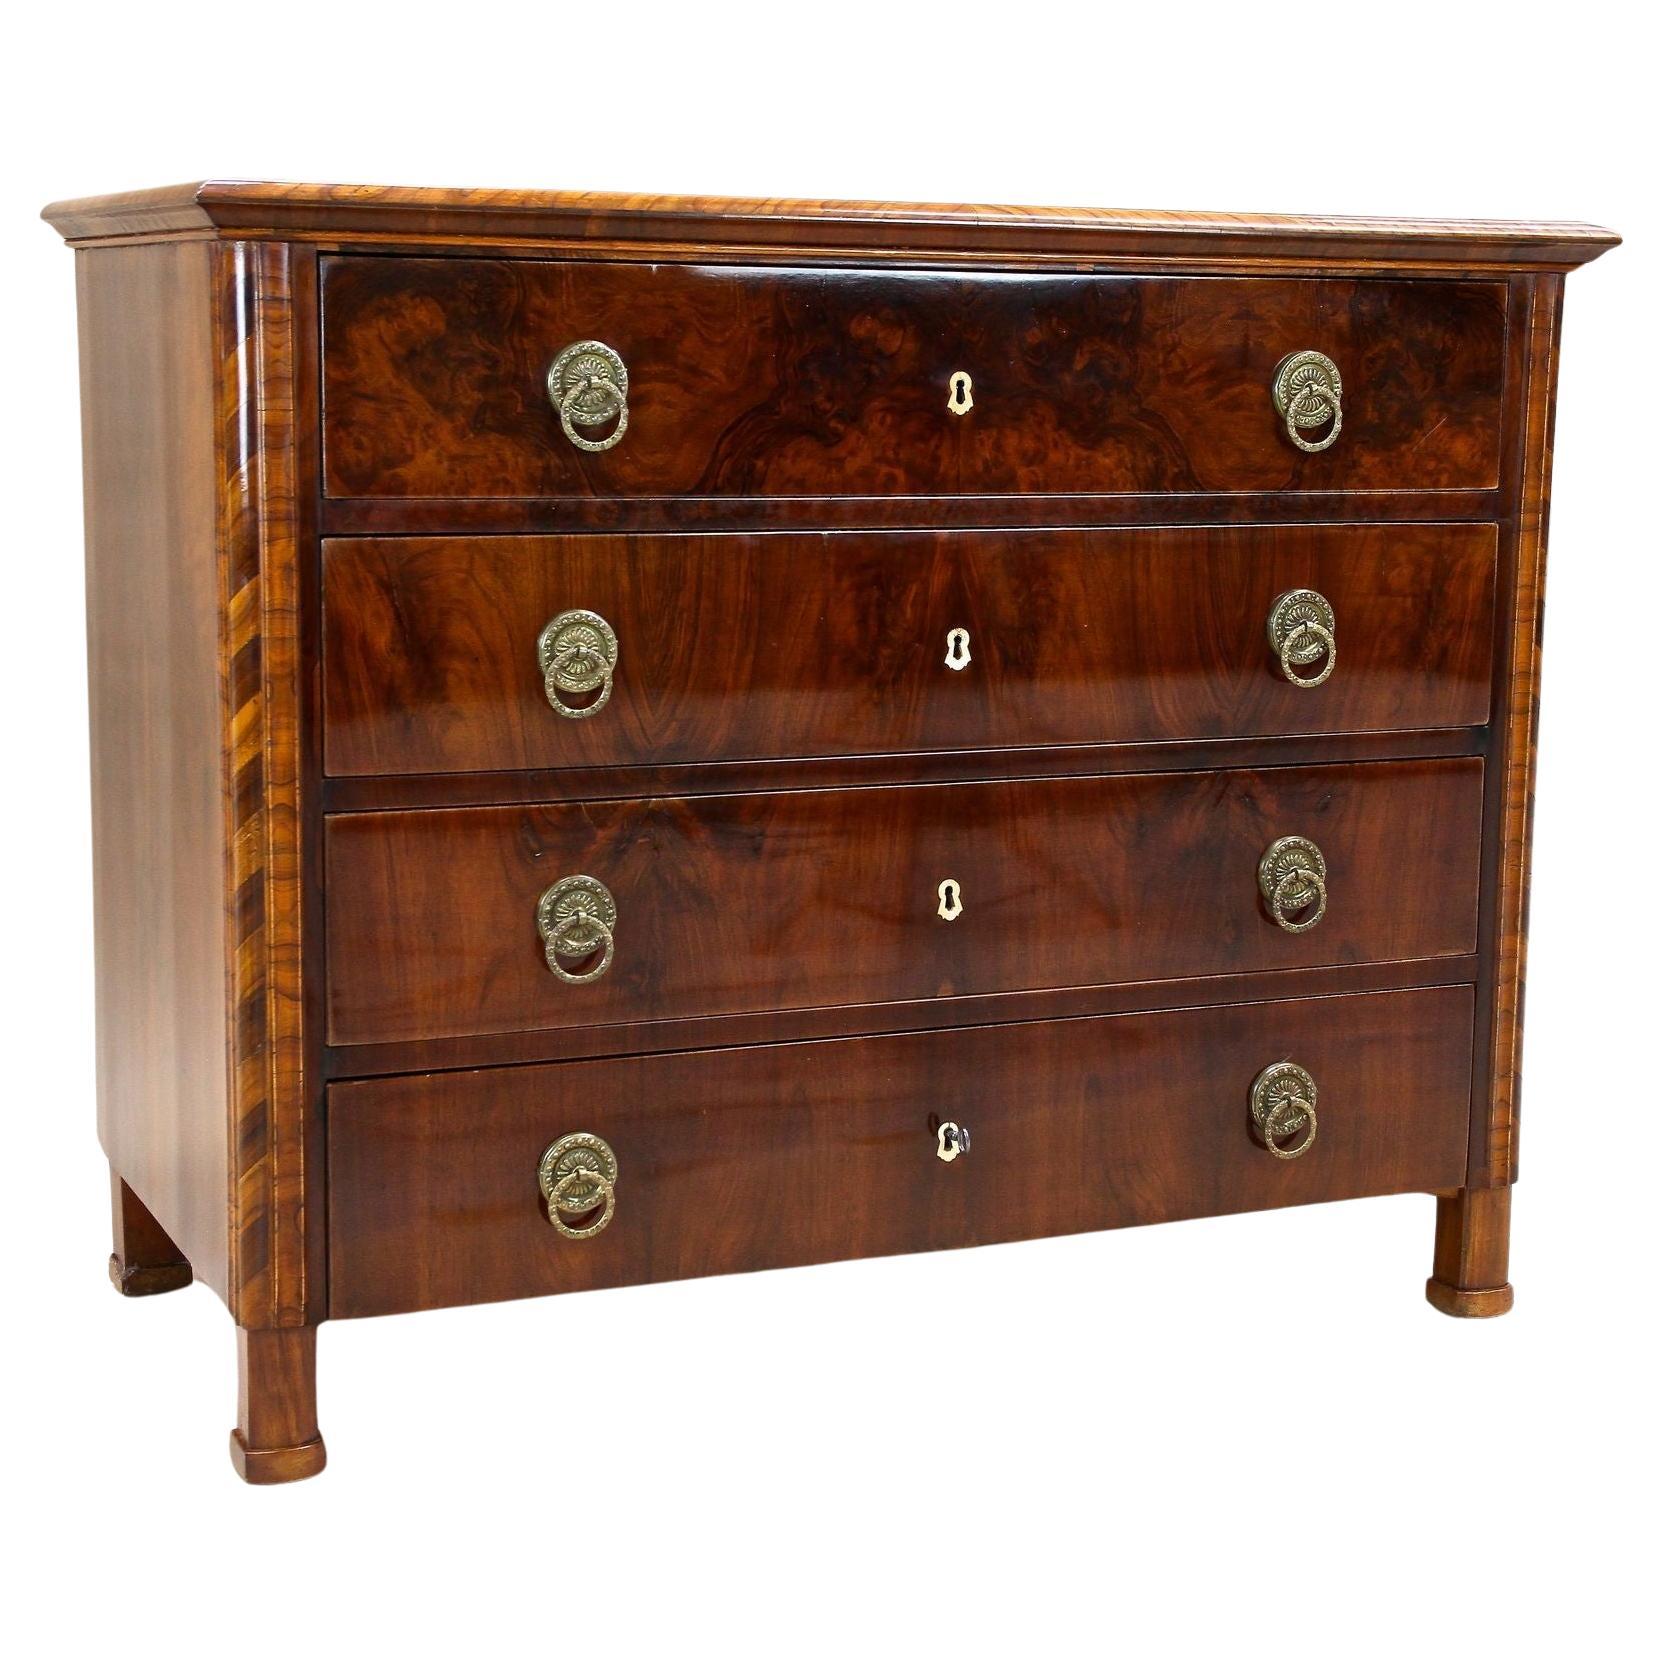 19th Century Biedermeier Nutwood Chest of Drawers/ Commode, Austria ca. 1840 For Sale